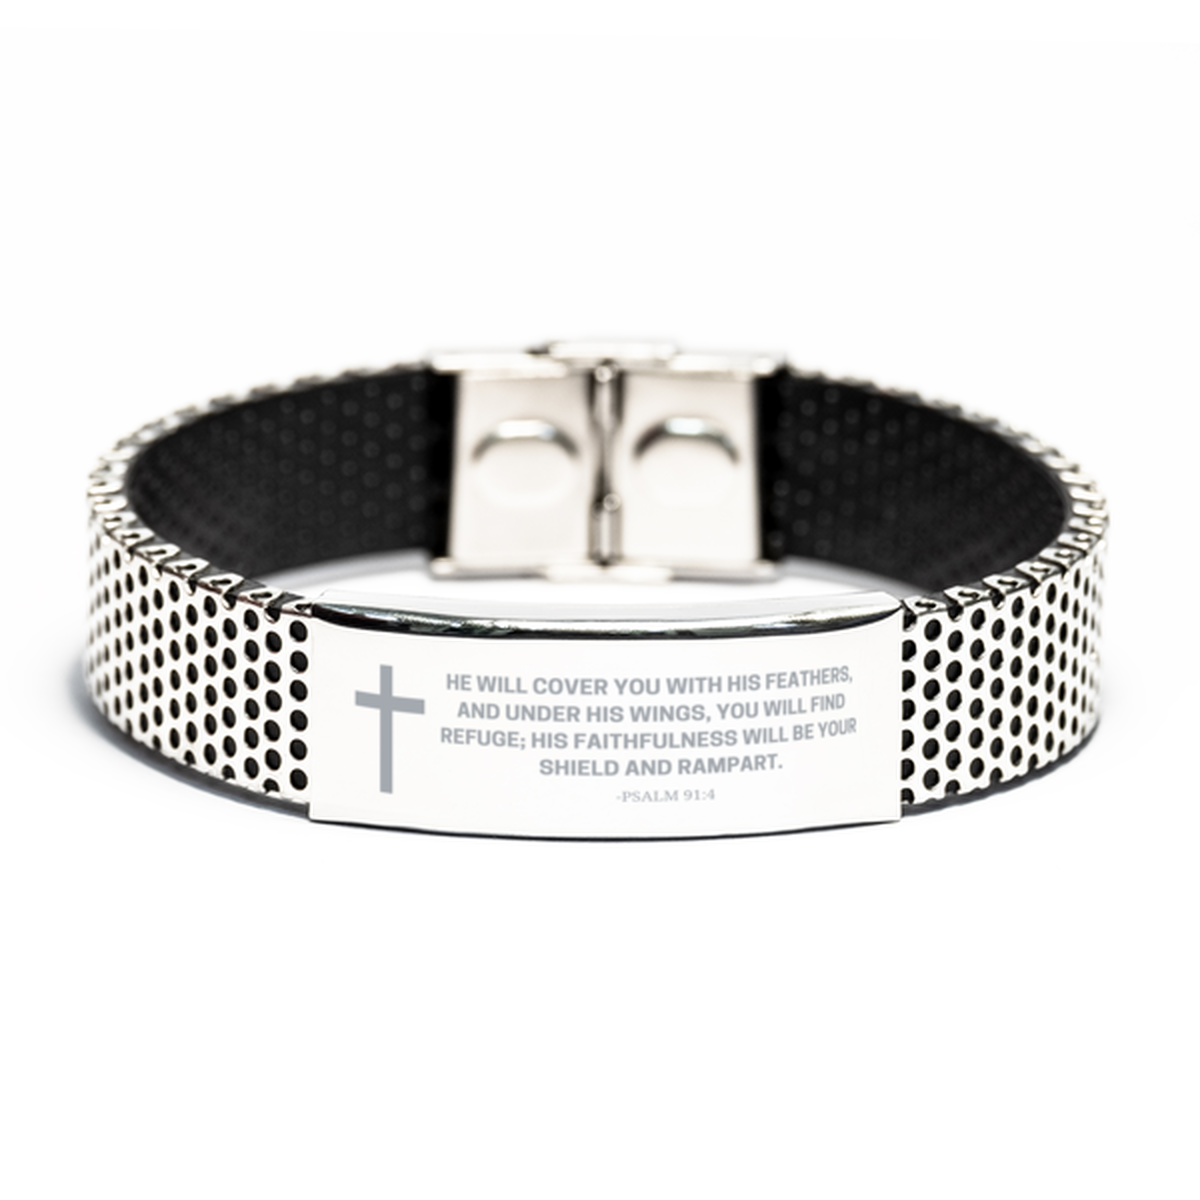 Baptism Gifts For Teenage Boys Girls, Christian Bible Verse Stainless Steel Bracelet, He will cover you with his feathers, Catholic Confirmation Gifts for Son, Godson, Grandson, Nephew